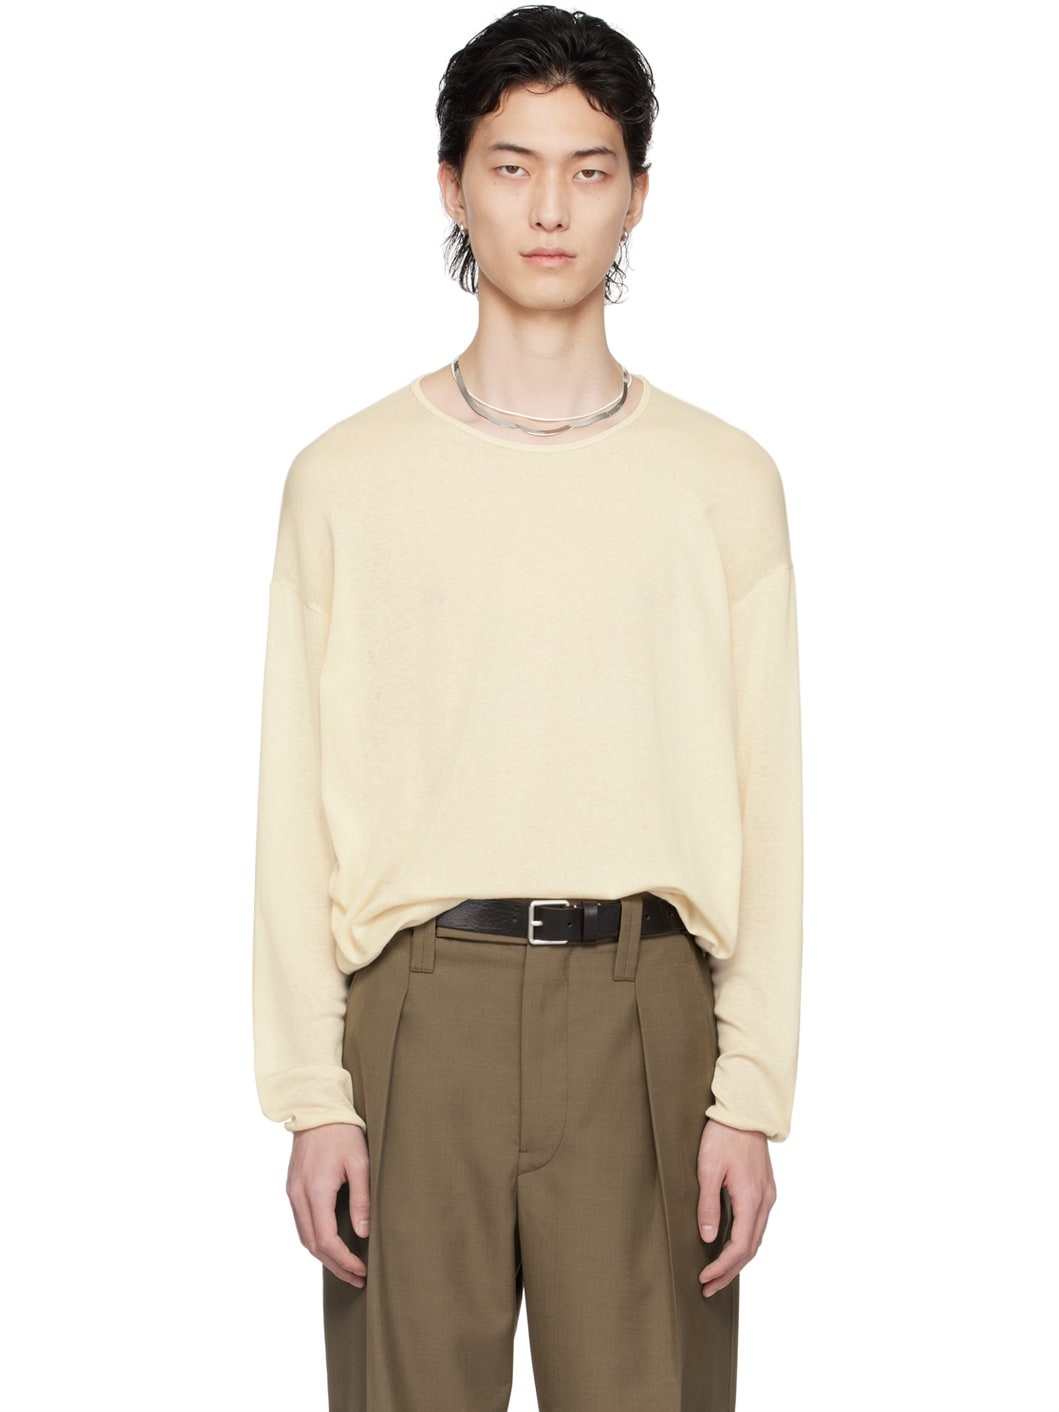 Off-White Scoop Neck Long Sleeve T-Shirt - 1